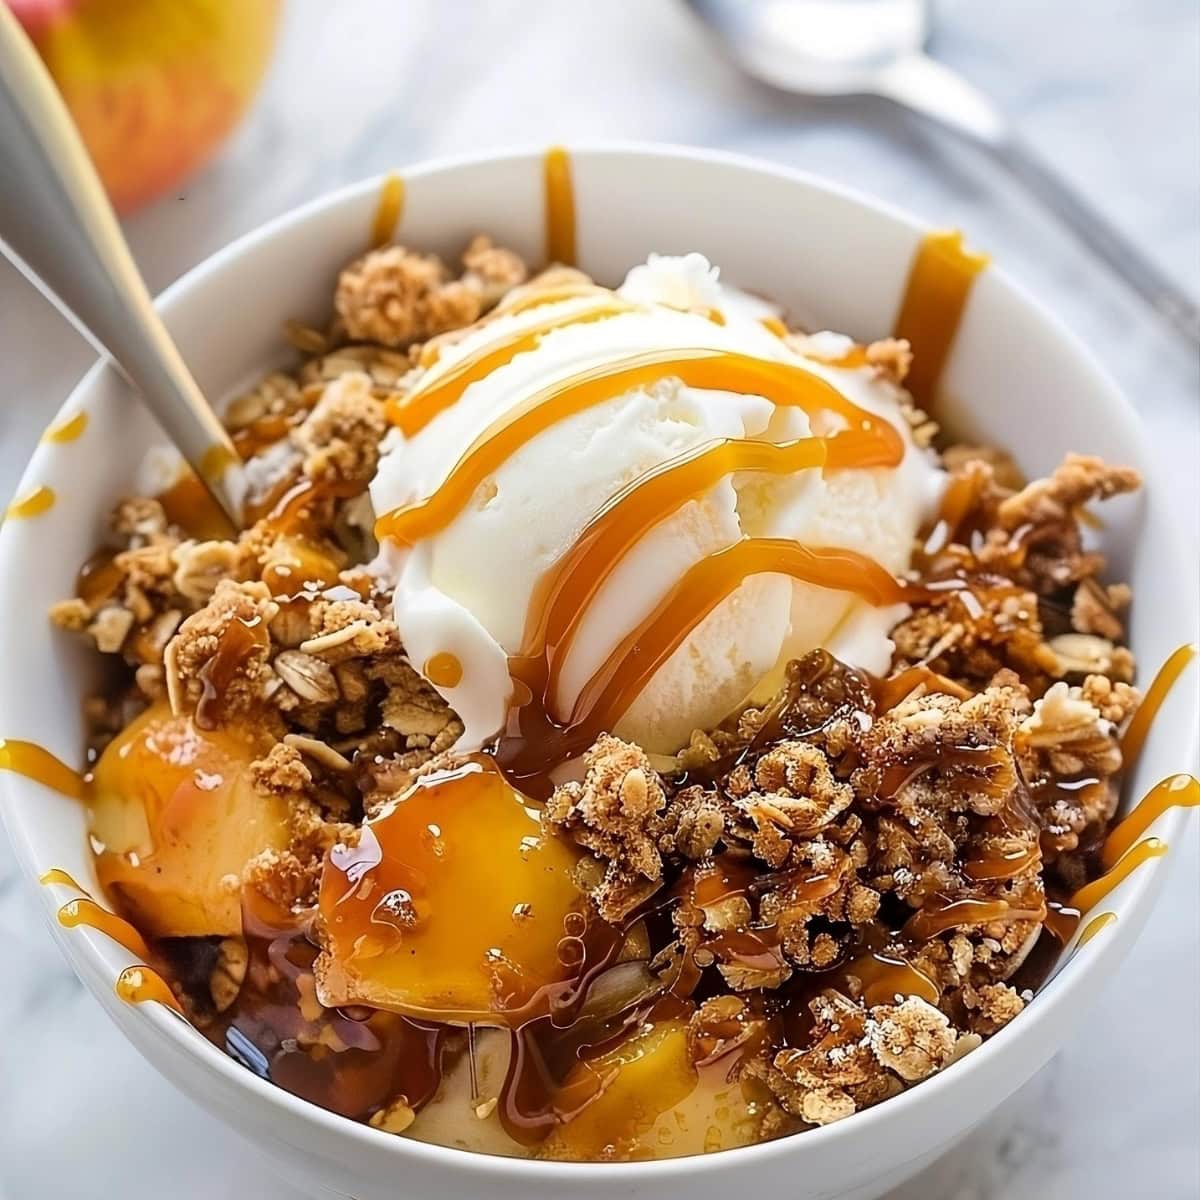 Serving of Caramel Apple Crisp in a white bowl garnished with vanilla ice cream drizzled with more caramel.